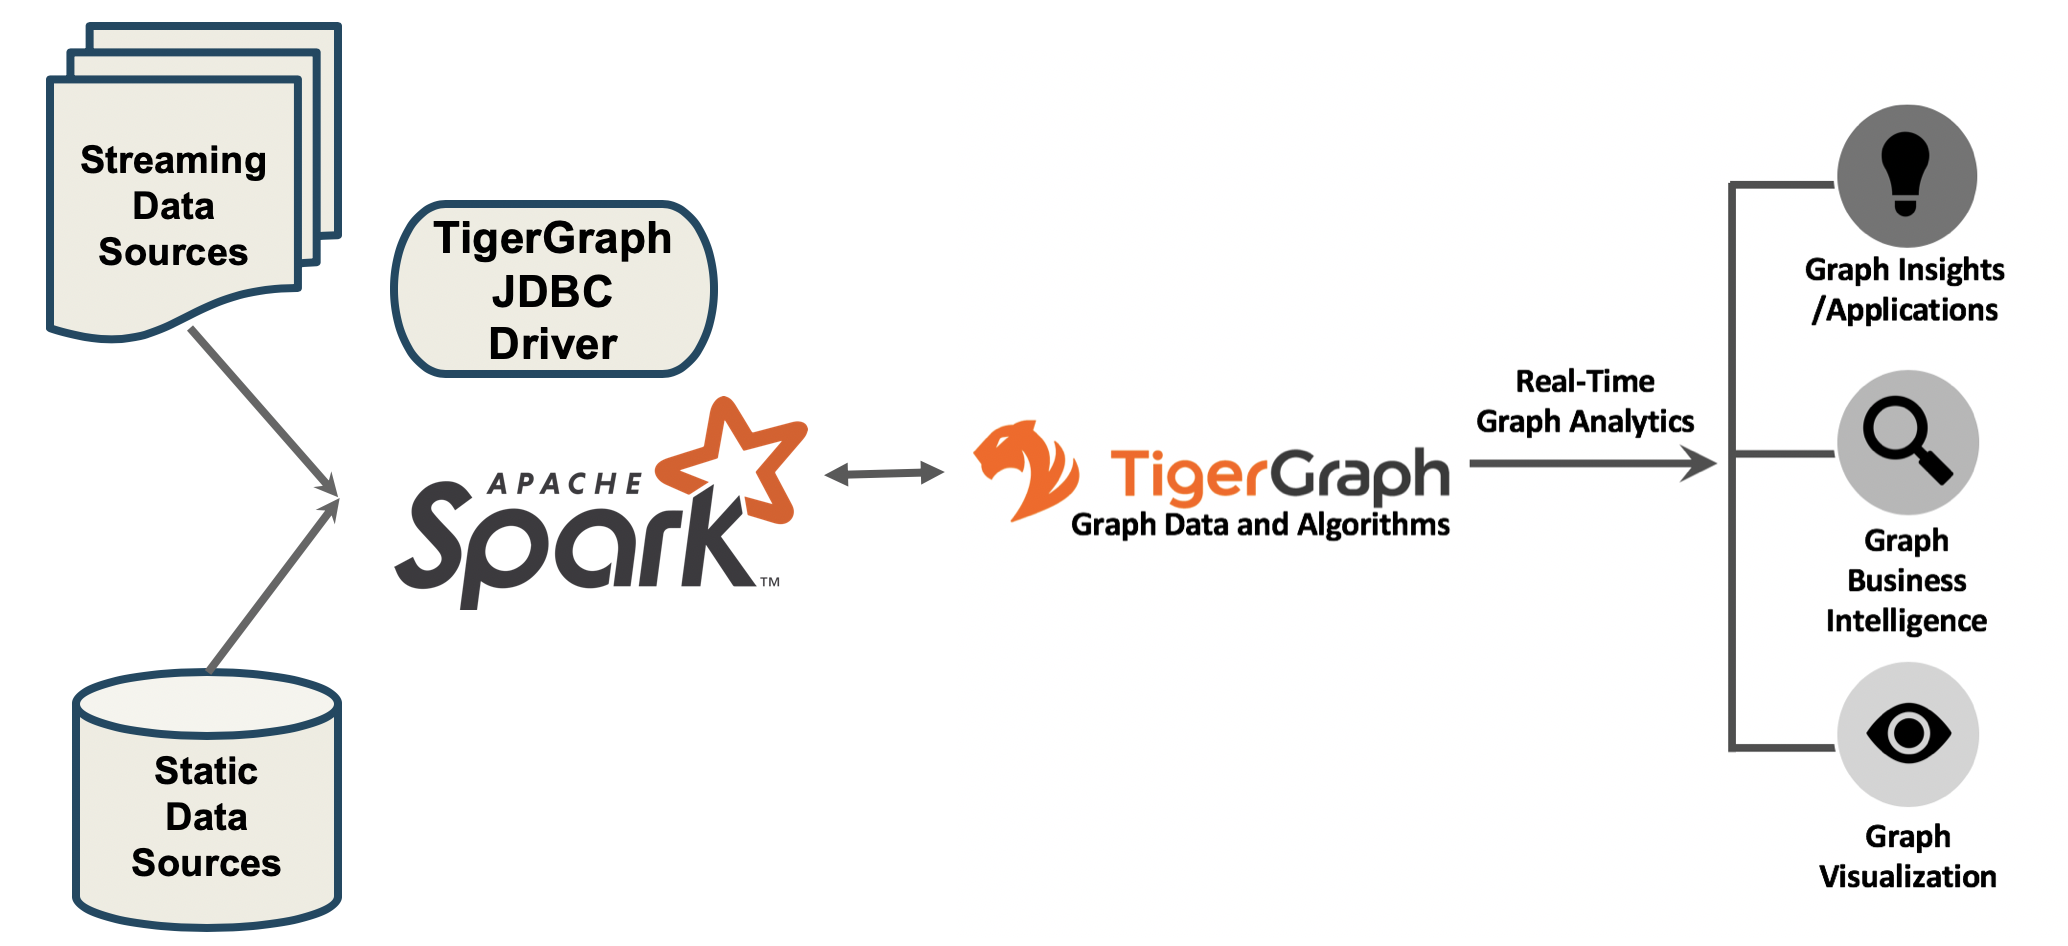 Diagram showing streaming and static data sources using Apache Spark and the TigerGraph JDBC server to perform two-way communication with TigerGraph services. The TigerGraph services shown are Graph Insights and applications, graph business intelligence, and graph visualization, all under the theme of Real-Time Graph Analytics.